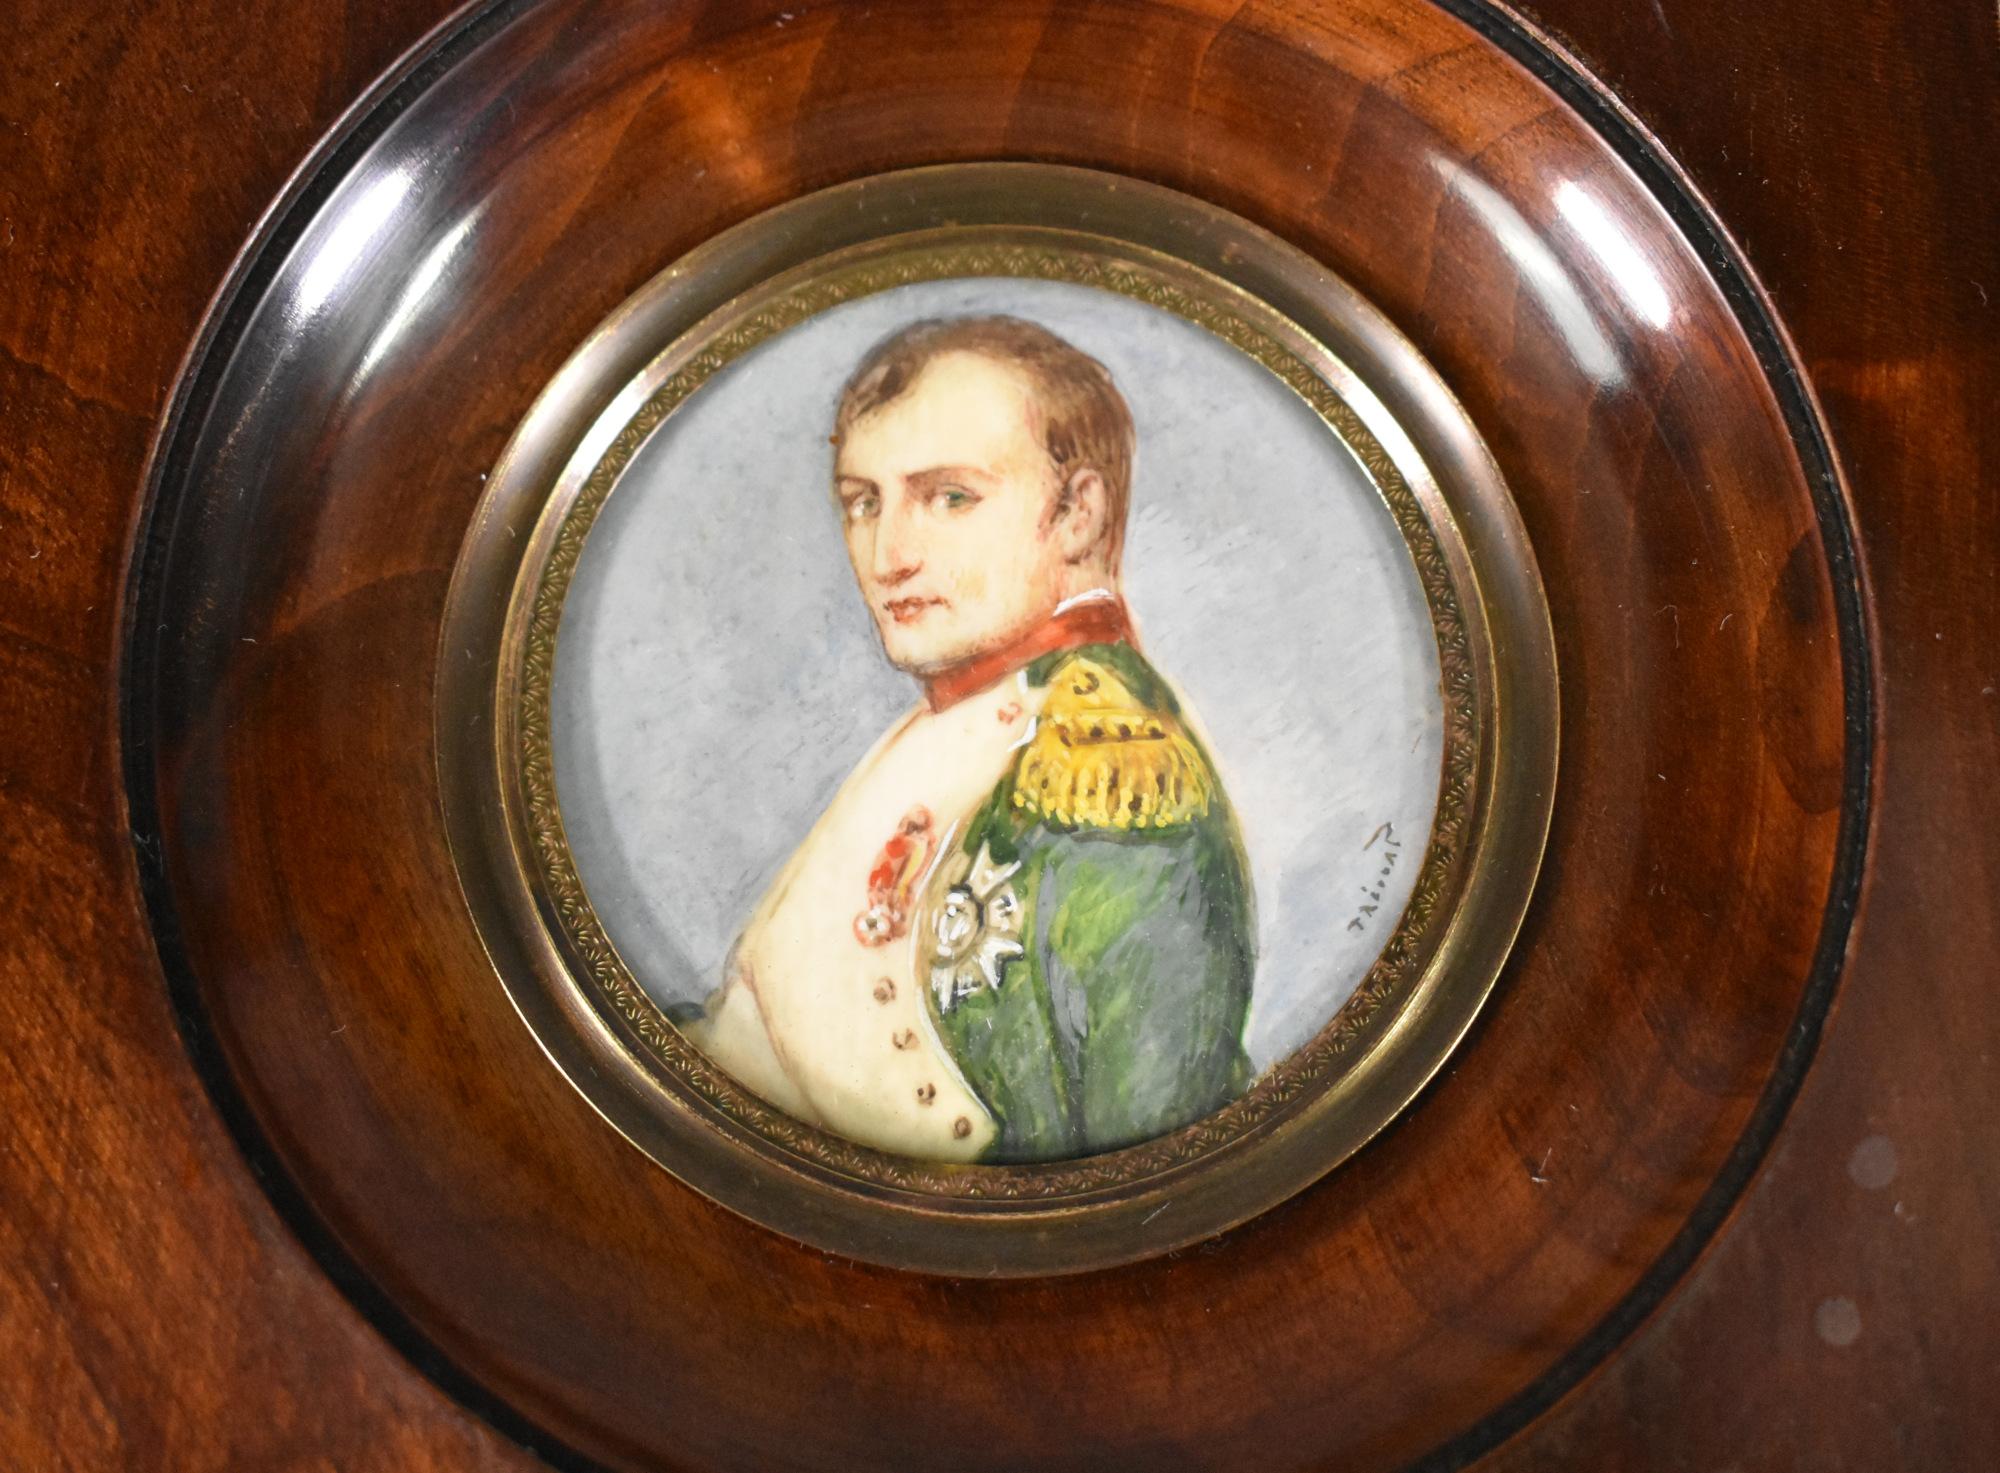 Miniature Portrait Painting of Napoleon signed by Prévost from the nineteenth century. 

The frame is in solid mahogany and is dished and highly polished.

The convex clear glass is held in place with a brass bezel. 

The signature Prévost is